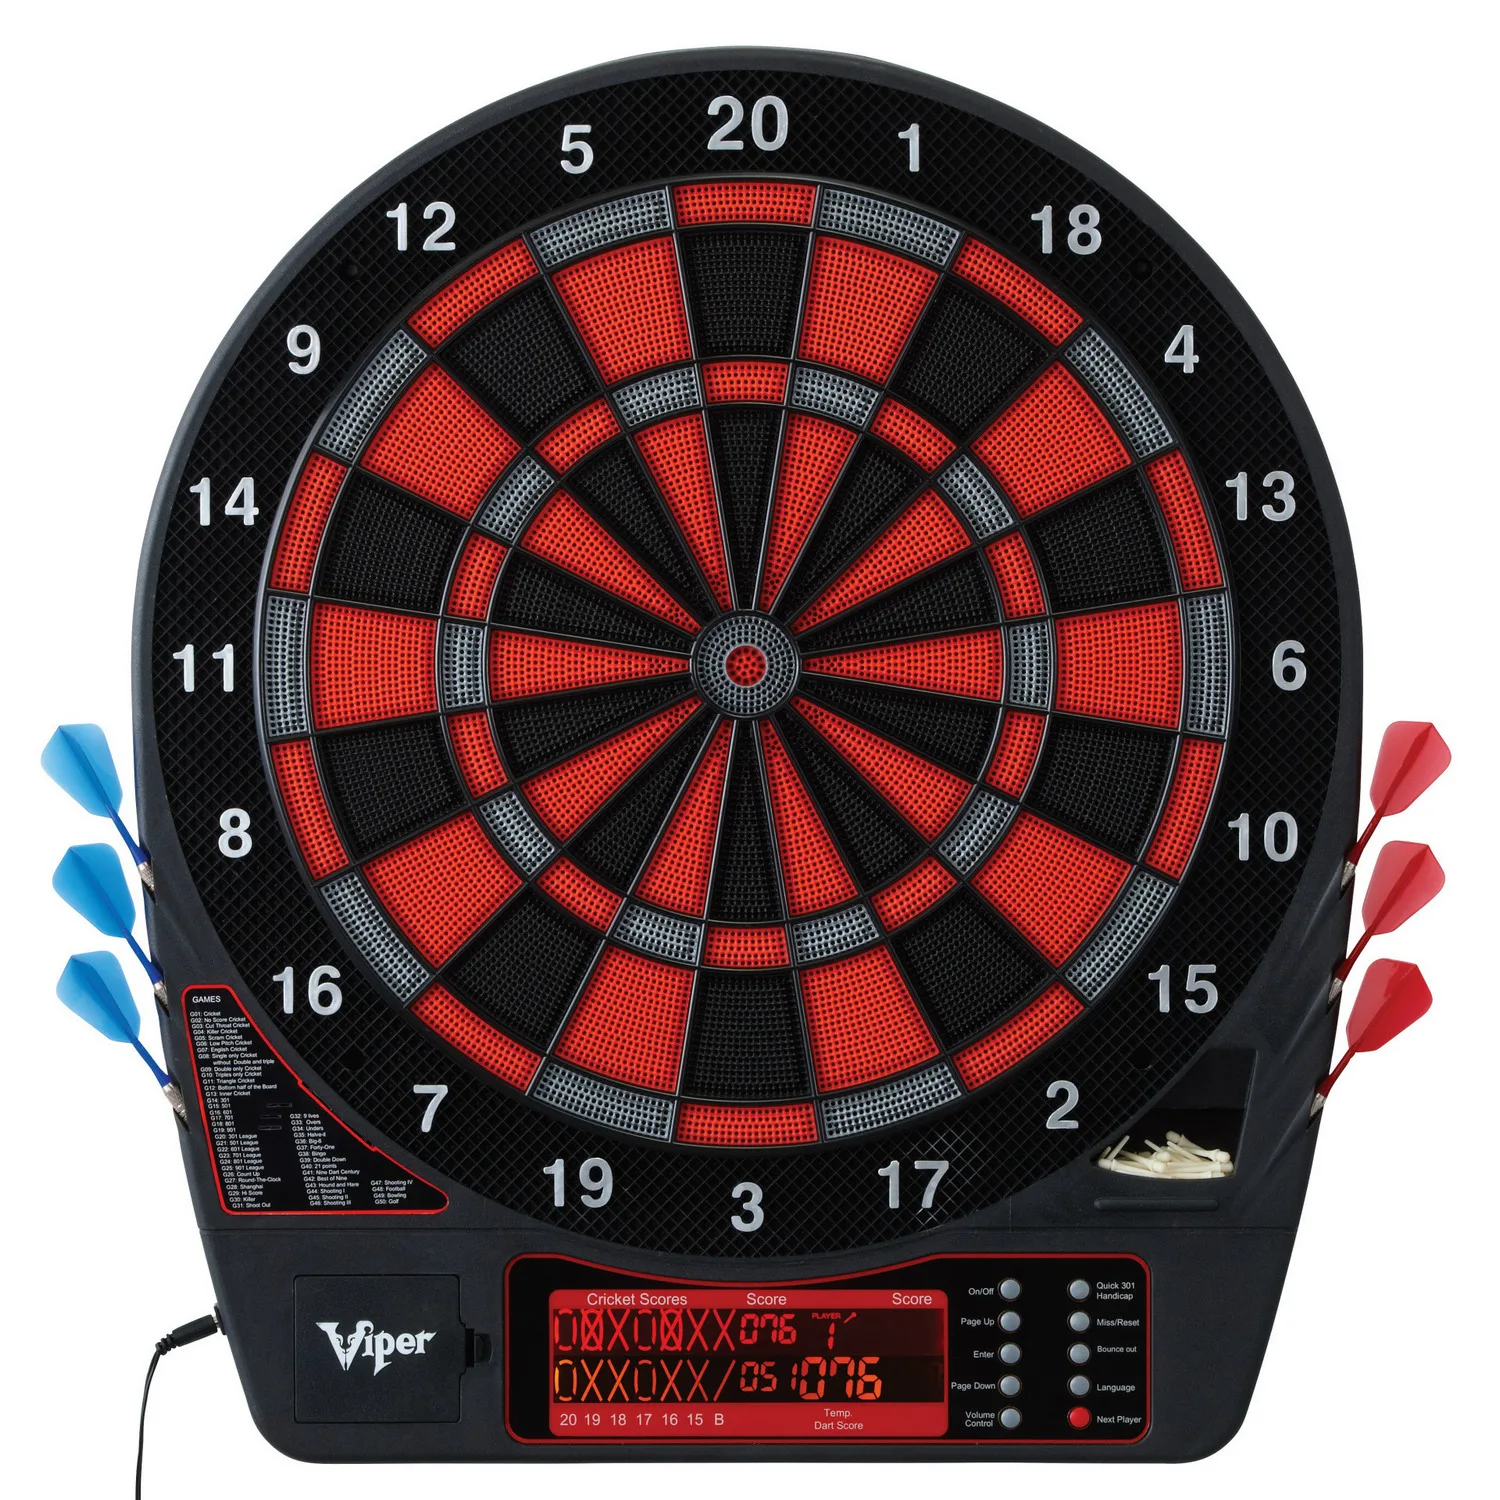 Original  Viper Specter Electronic Dartboard Pro Size 50 Games Height LCD Display Scoreboard with Impact-Tough Nylon Target tactical helmet wendy rail adapter for howard leight impact sport electronic shooting earmuff airsoft hunting shooting headphone